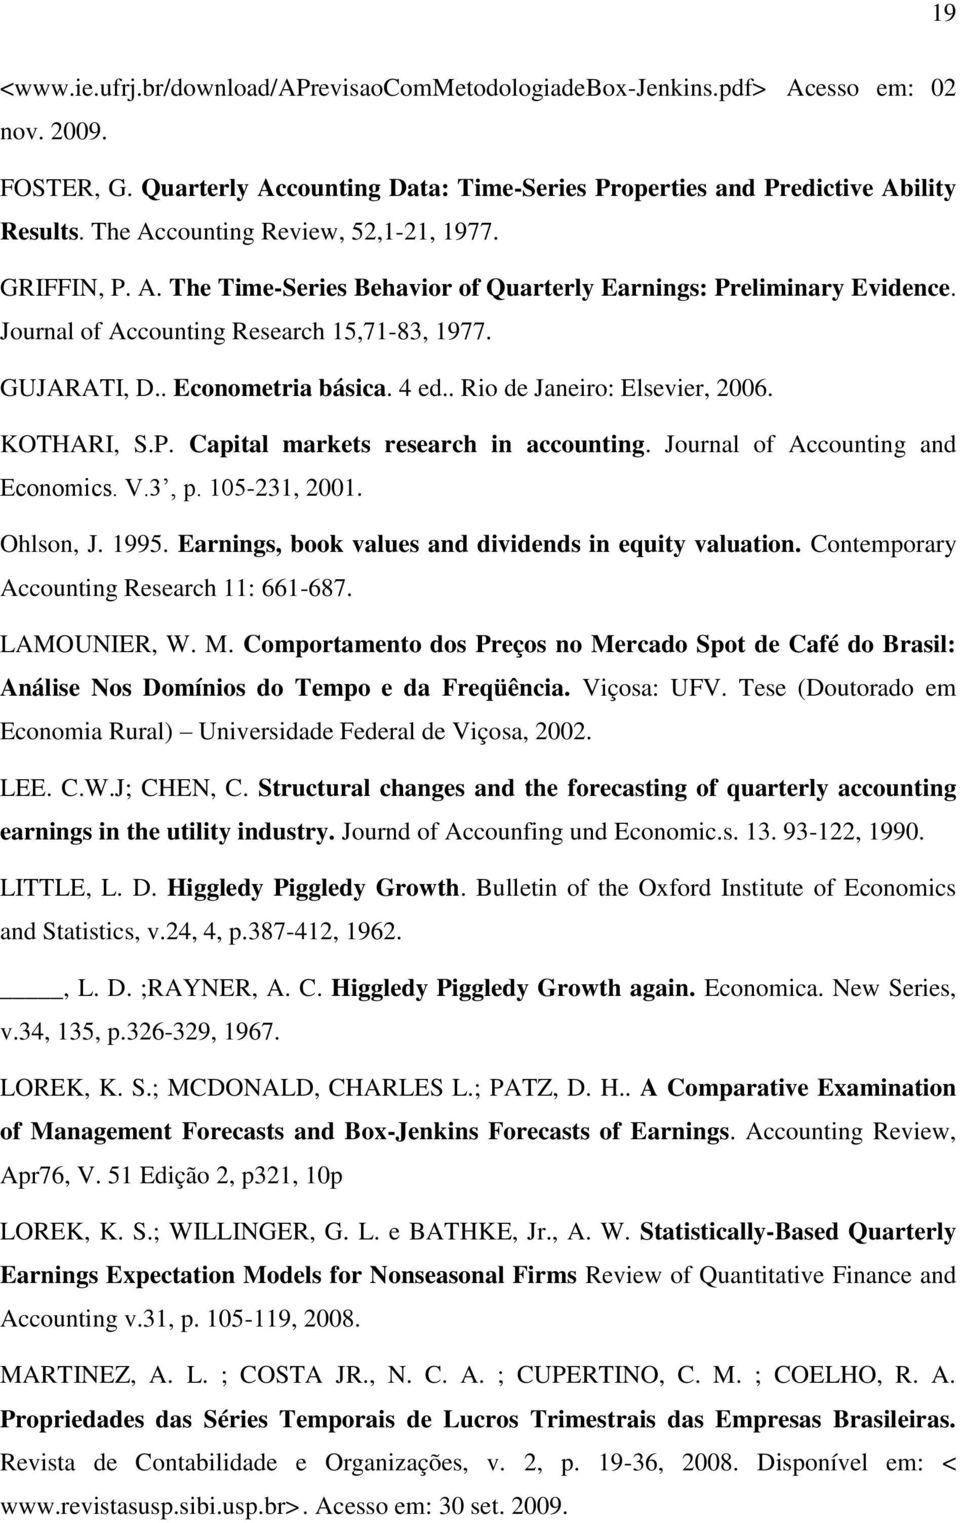 4 ed.. Rio de Janeiro: Elsevier, 2006. KOTHARI, S.P. Capial markes research in accouning. Journal of Accouning and Economics. V.3, p. 105-231, 2001. Ohlson, J. 1995.